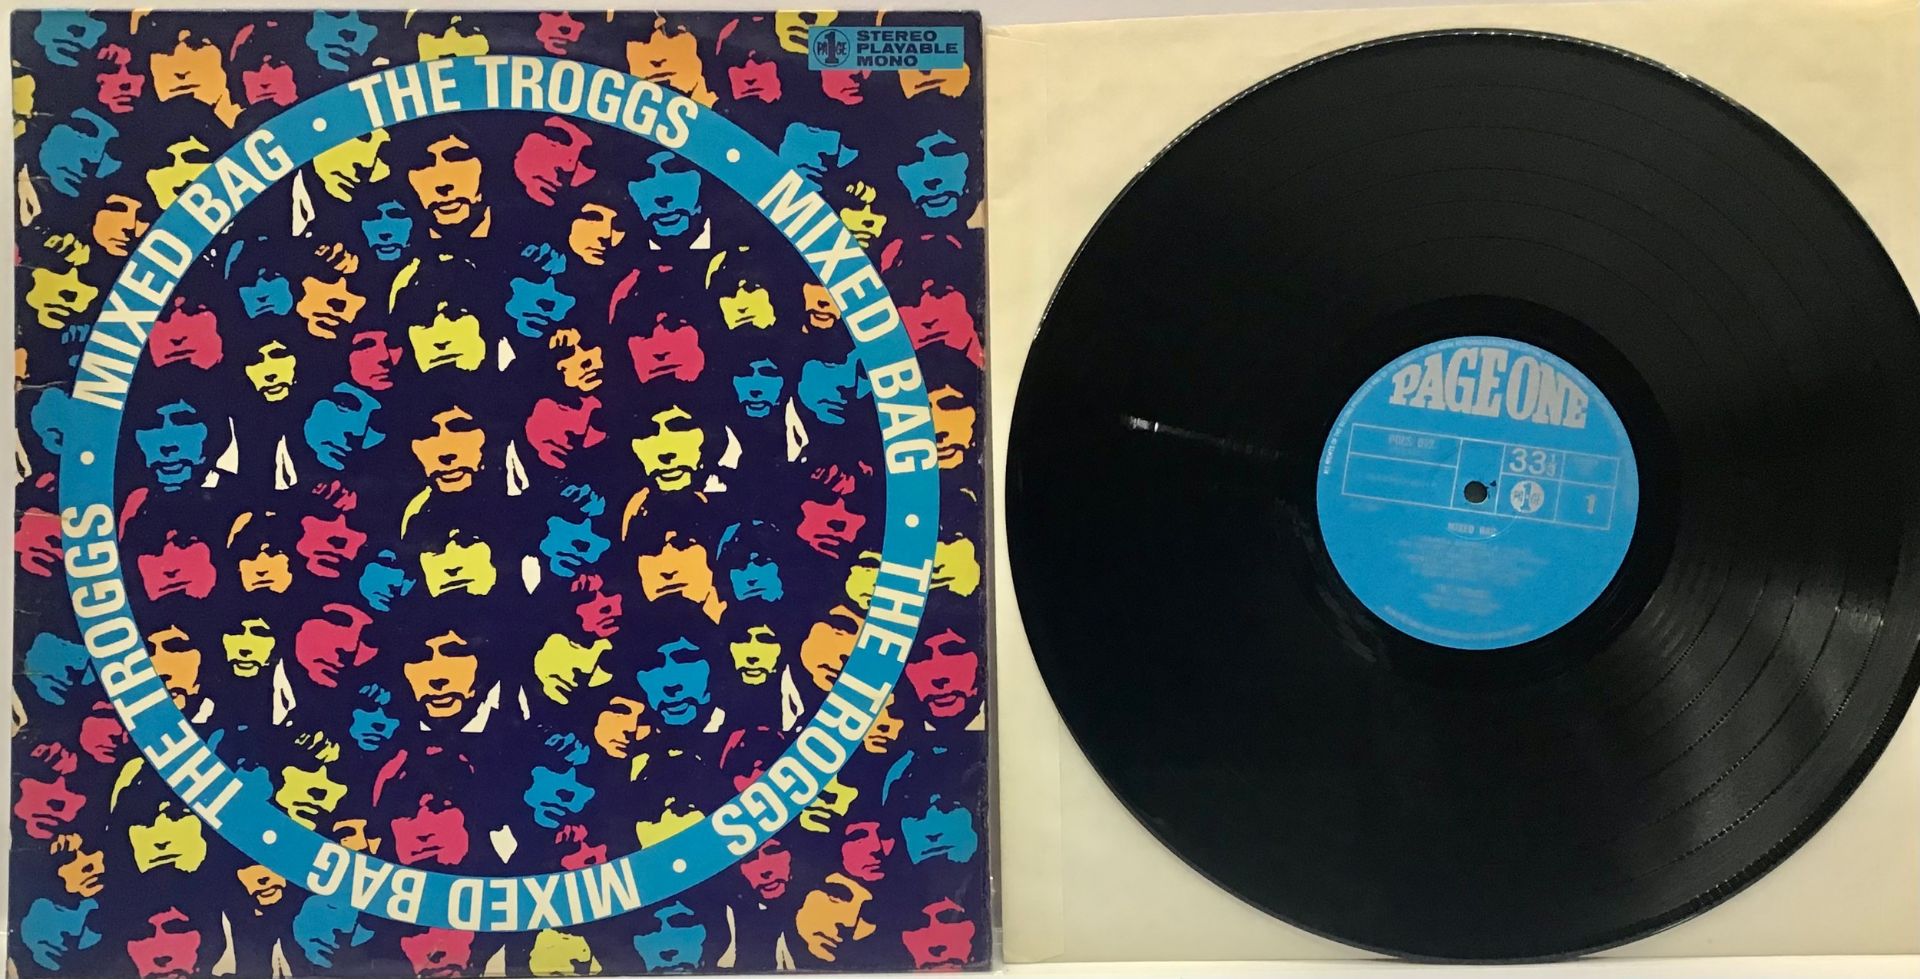 THE TROGGS ‘MIXED BAG’ UK VINYL ALBUM. This is a superb 1st press copy on Page One Records POLS